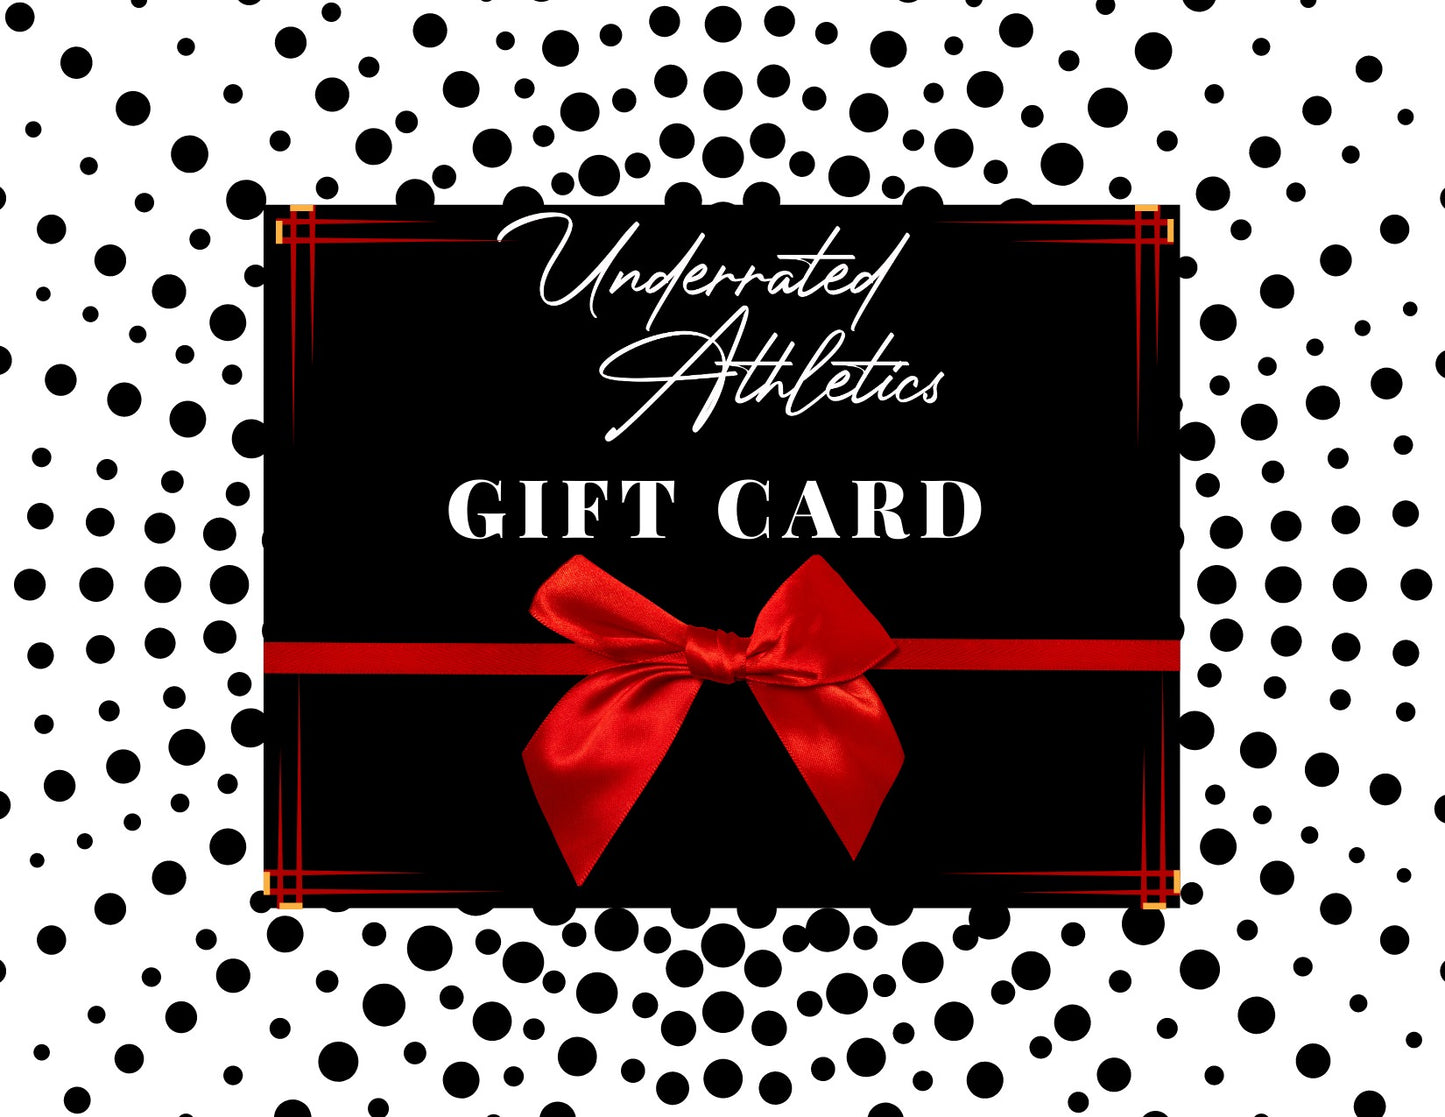 Underrated Athletics Gift Card